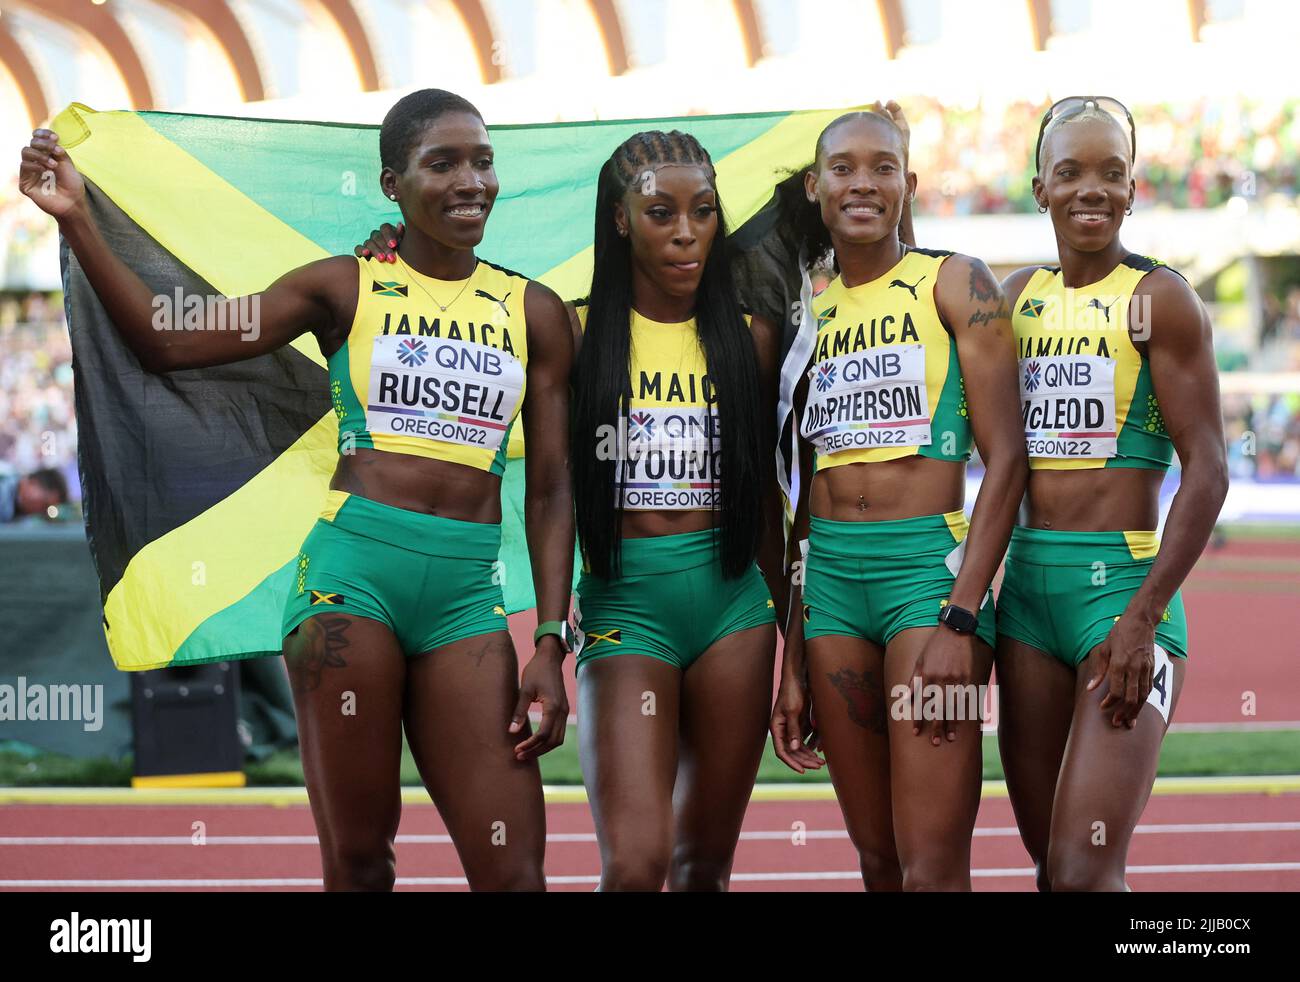 Athletics - World Athletics Championships - Women's 4x400 Metres Relay - Final - Hayward Field, Eugene, Oregon, U.S. - July 24, 2022 Jamaica's Janieve Russell, Charokee Young, Stephenie Ann McPherson and Candice McLeod pose after finishing the women's 4x400 metres final in second place REUTERS/Lucy Nicholson Stock Photo